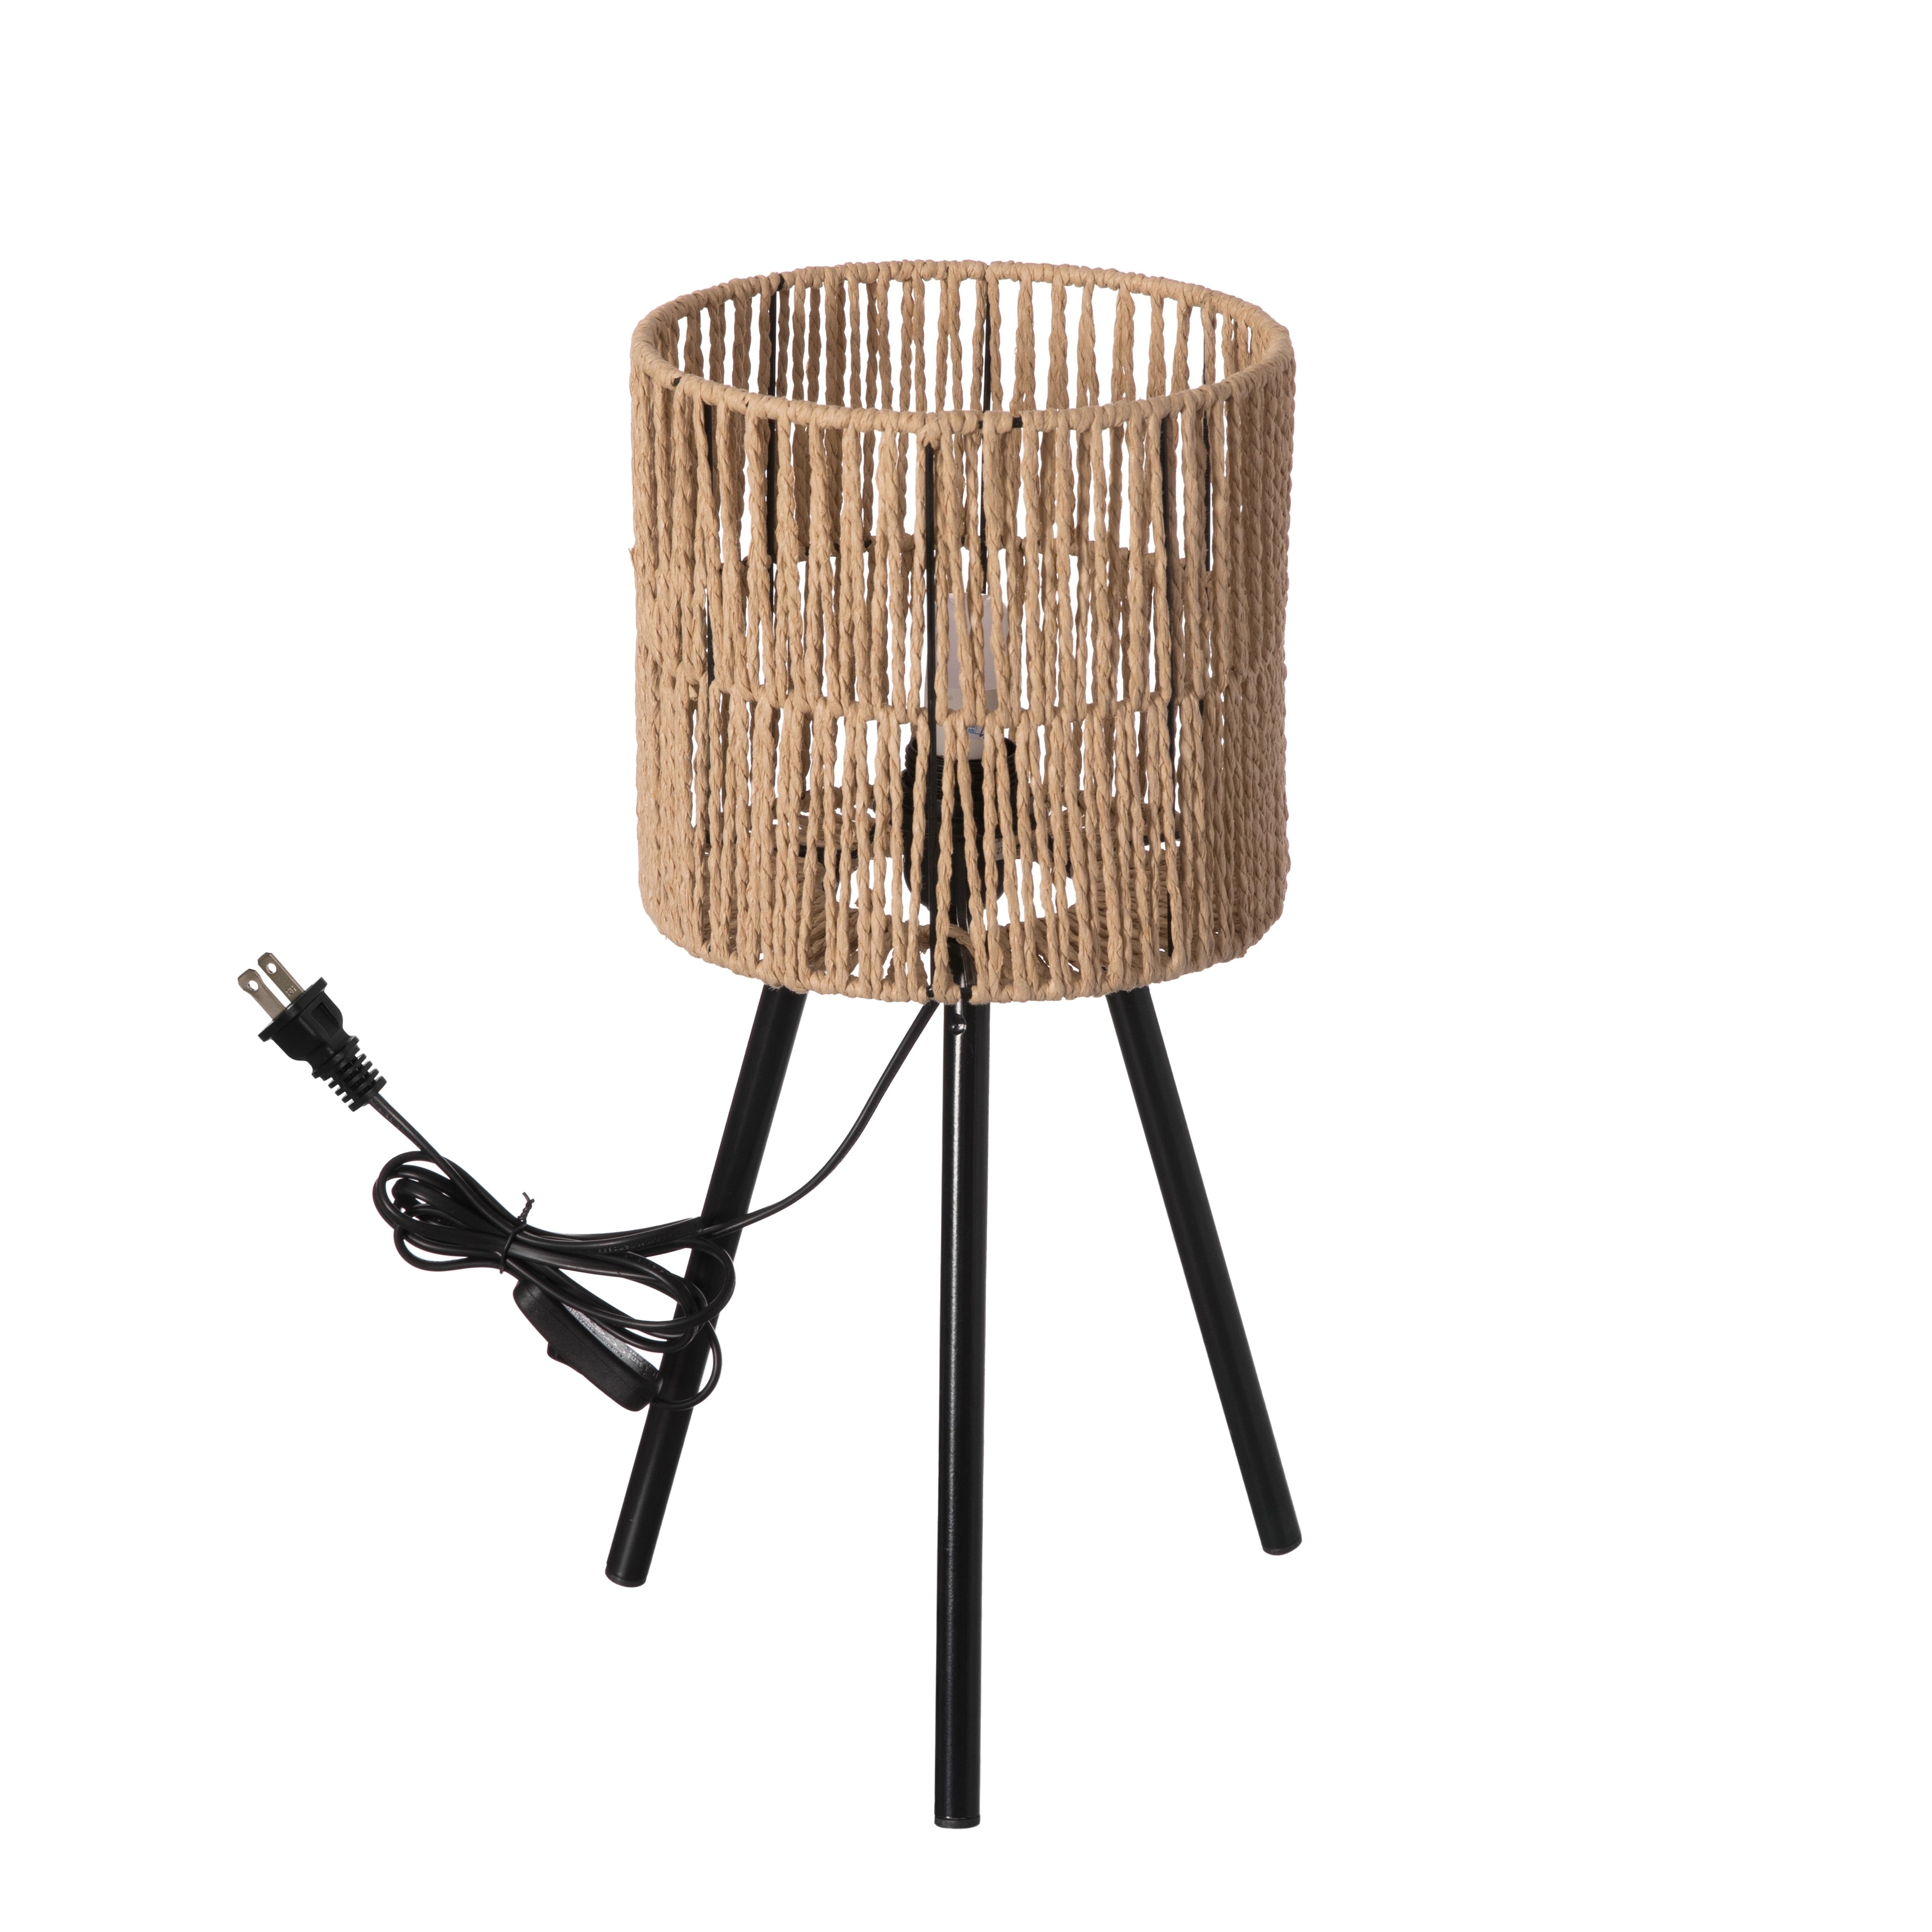 Woven Designed Bamboo Tripod Floor Lamp with Plug in Cord On and